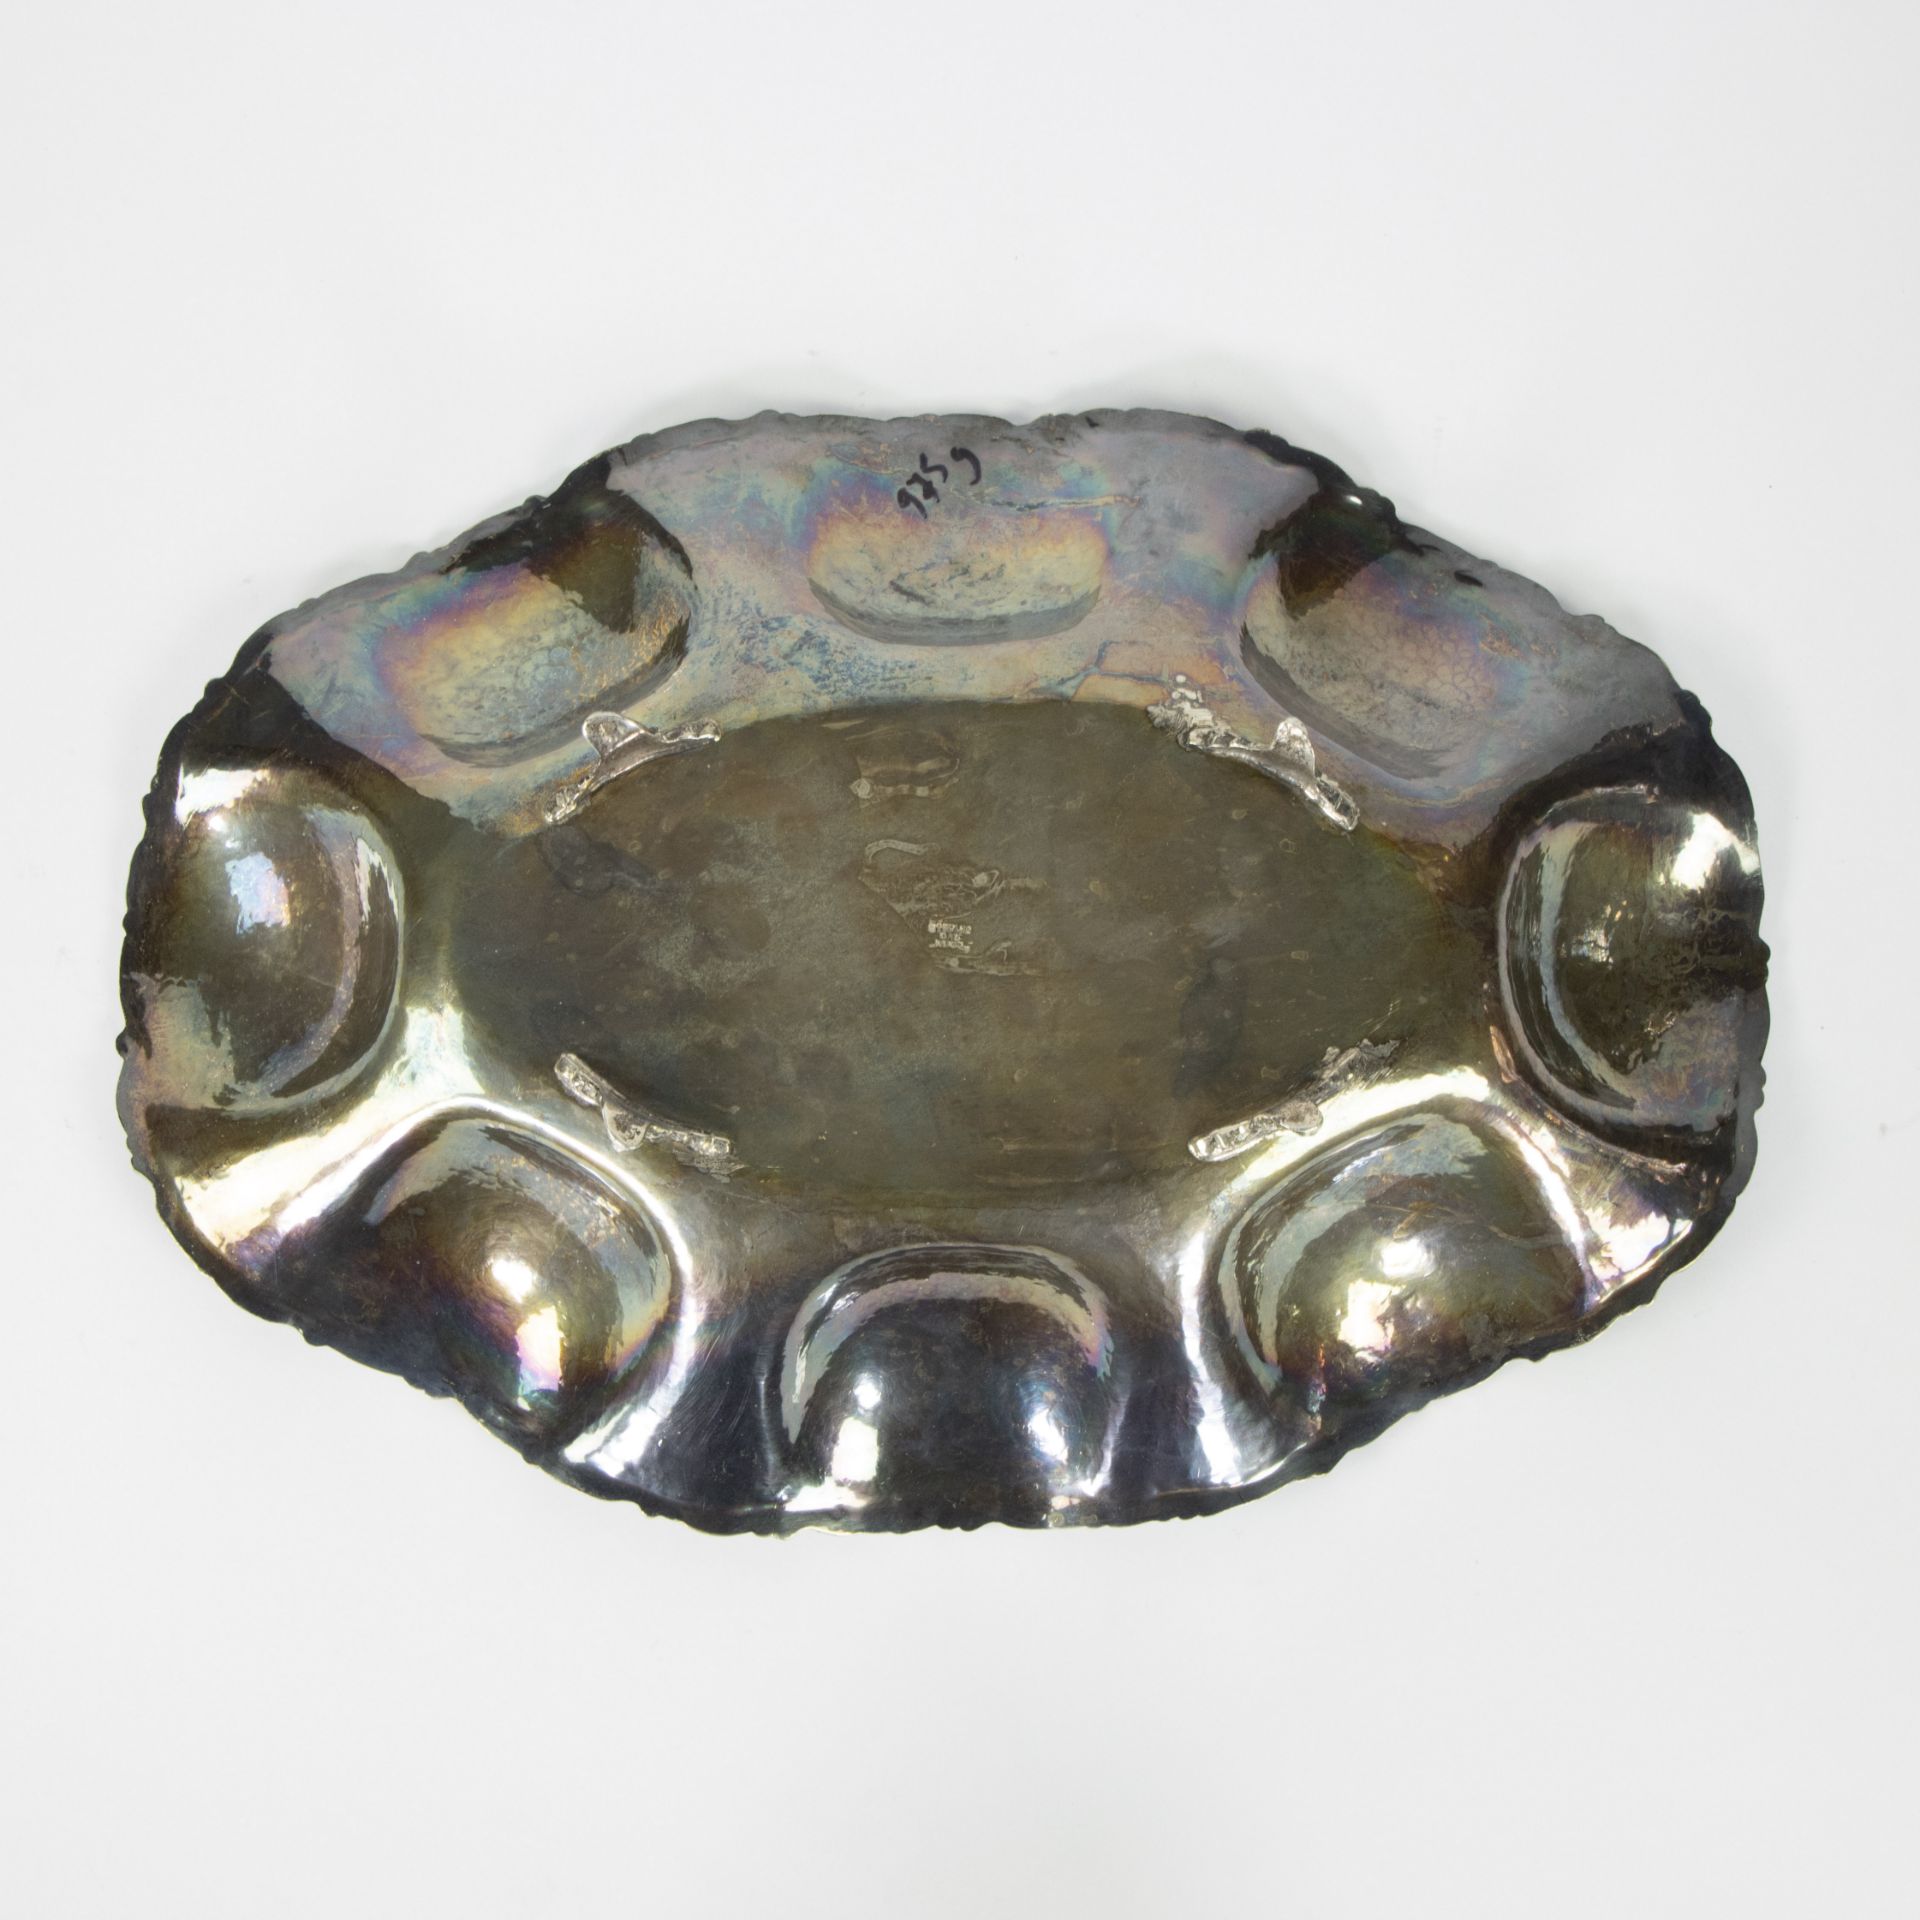 Silver bowl, Mexican content 925, 975 gram - Image 4 of 4